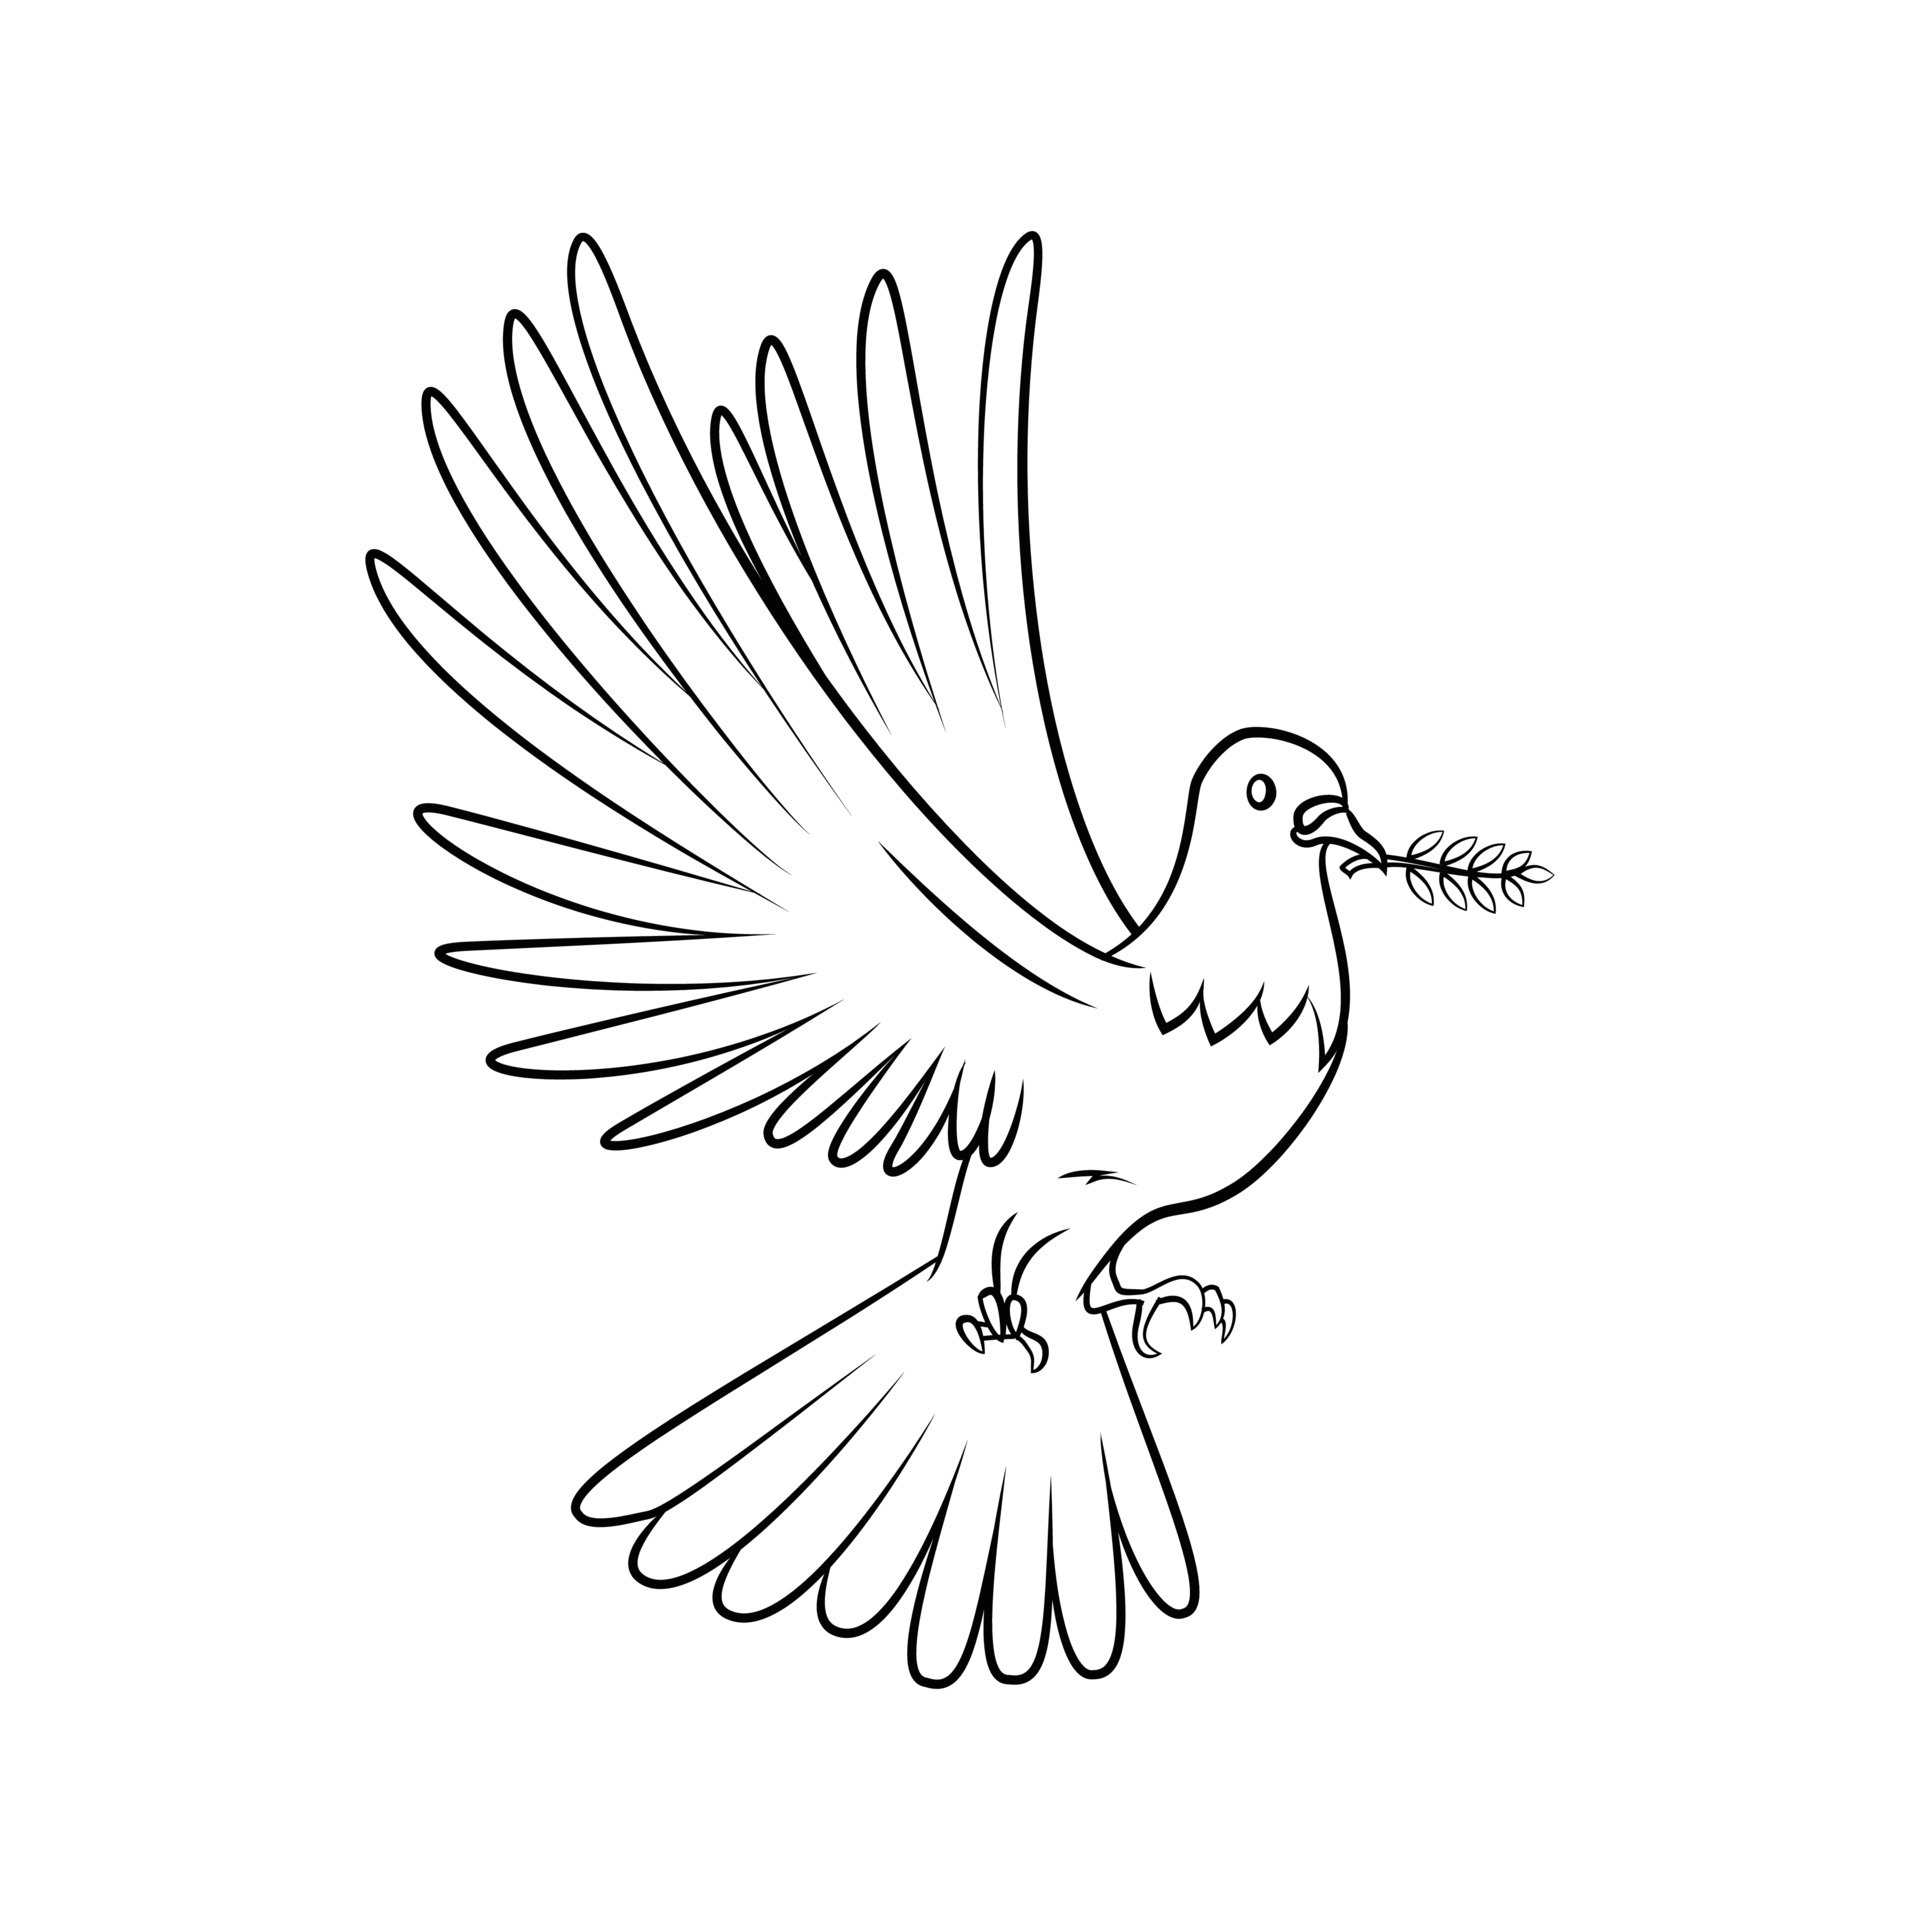 Sketch of pigeon stock vector. Illustration of freedom - 24772314